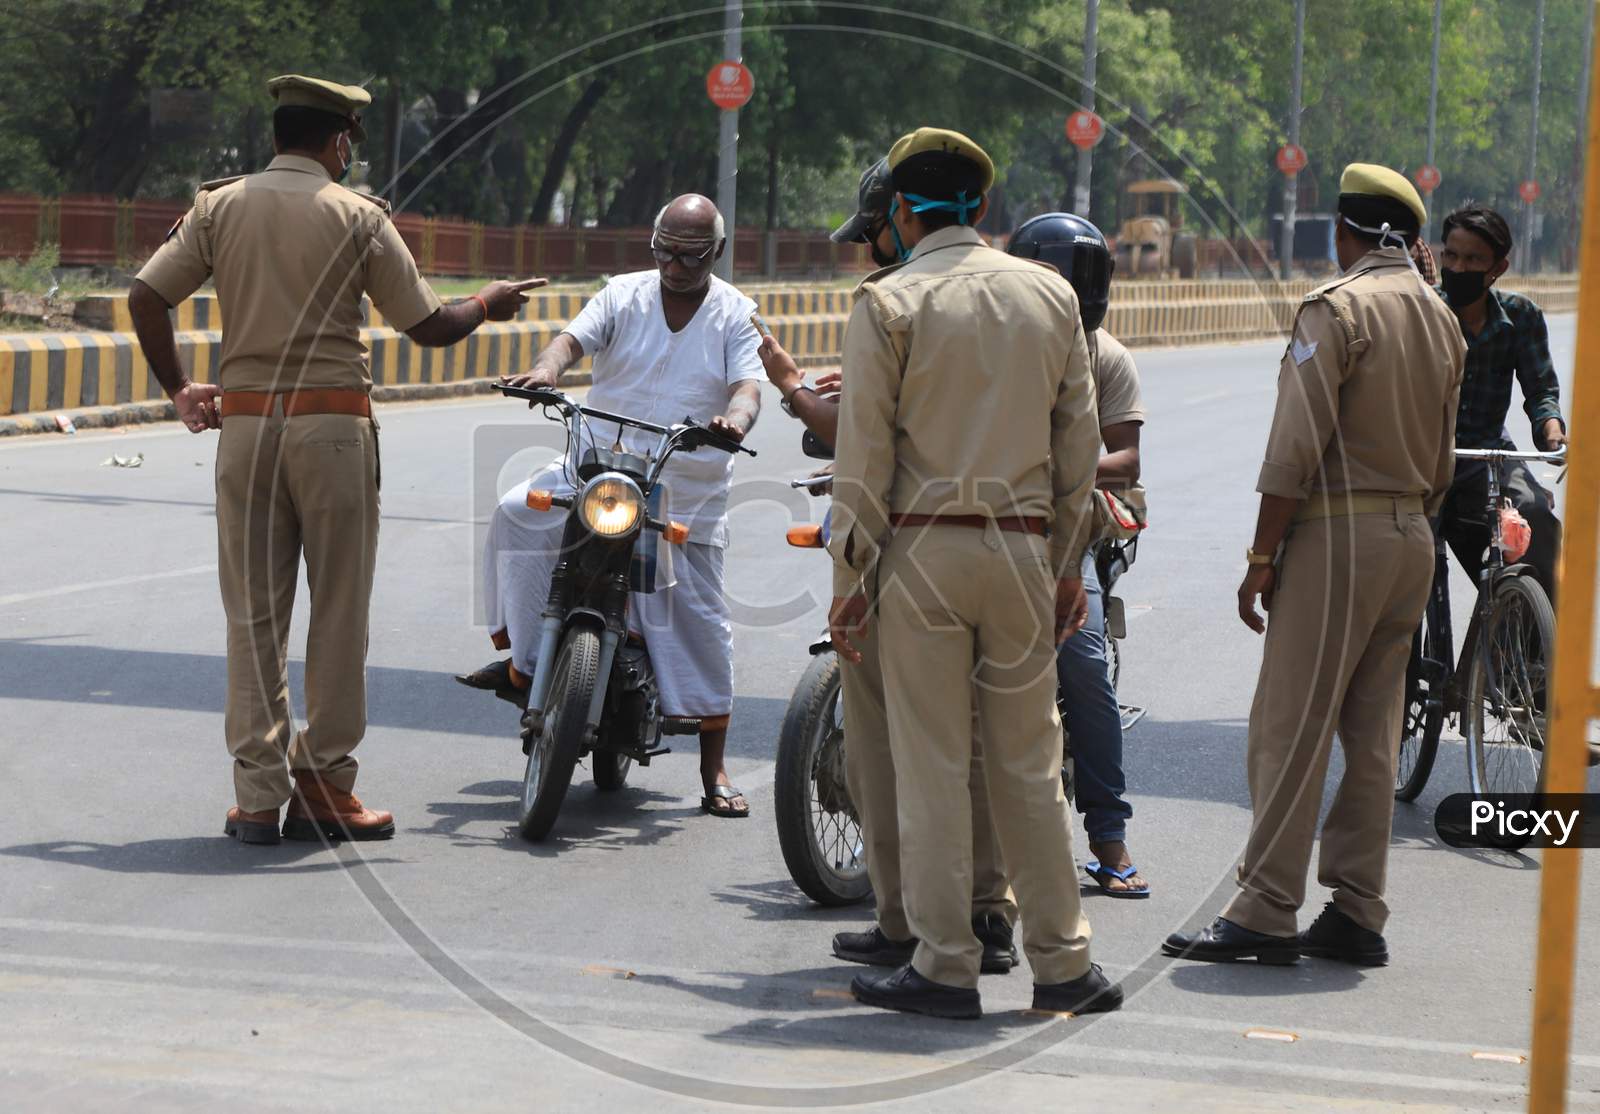 Policemen Checking  During A Nationwide Lockdown To Slow The Spreading Of The Coronavirus Disease (Covid-19), In Prayagraj, April, 17, 2020.